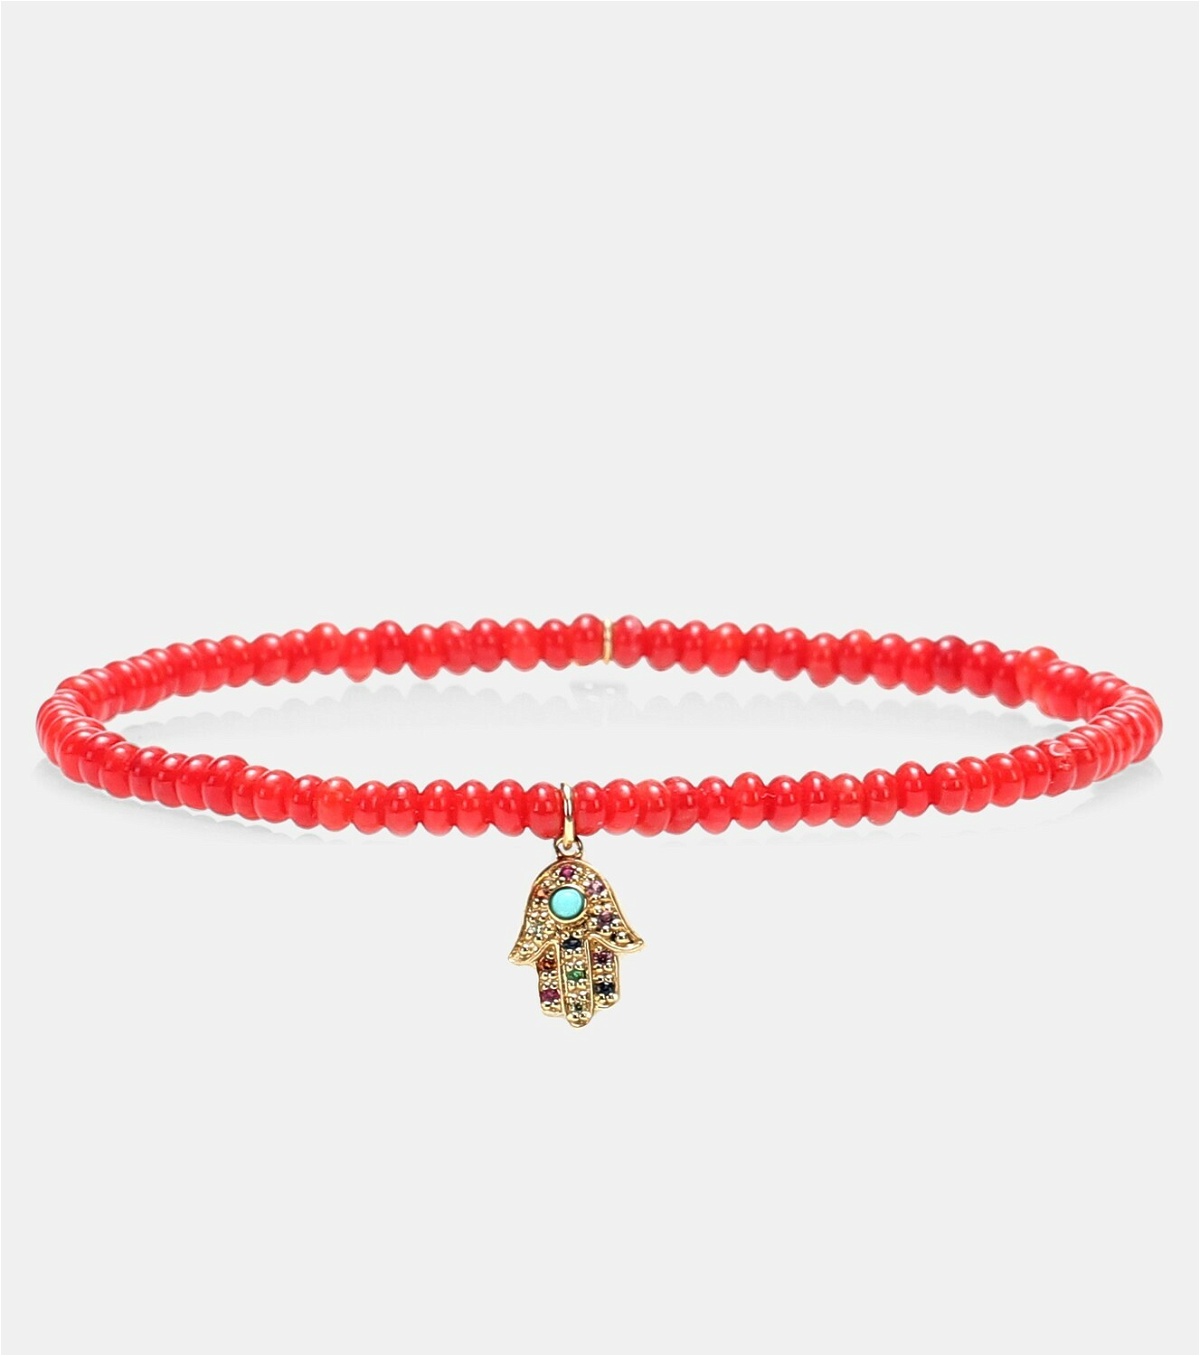 Sydney Evan Baby Hamsa Rainbow bamboo coral and 14kt gold beaded bracelet with sapphires